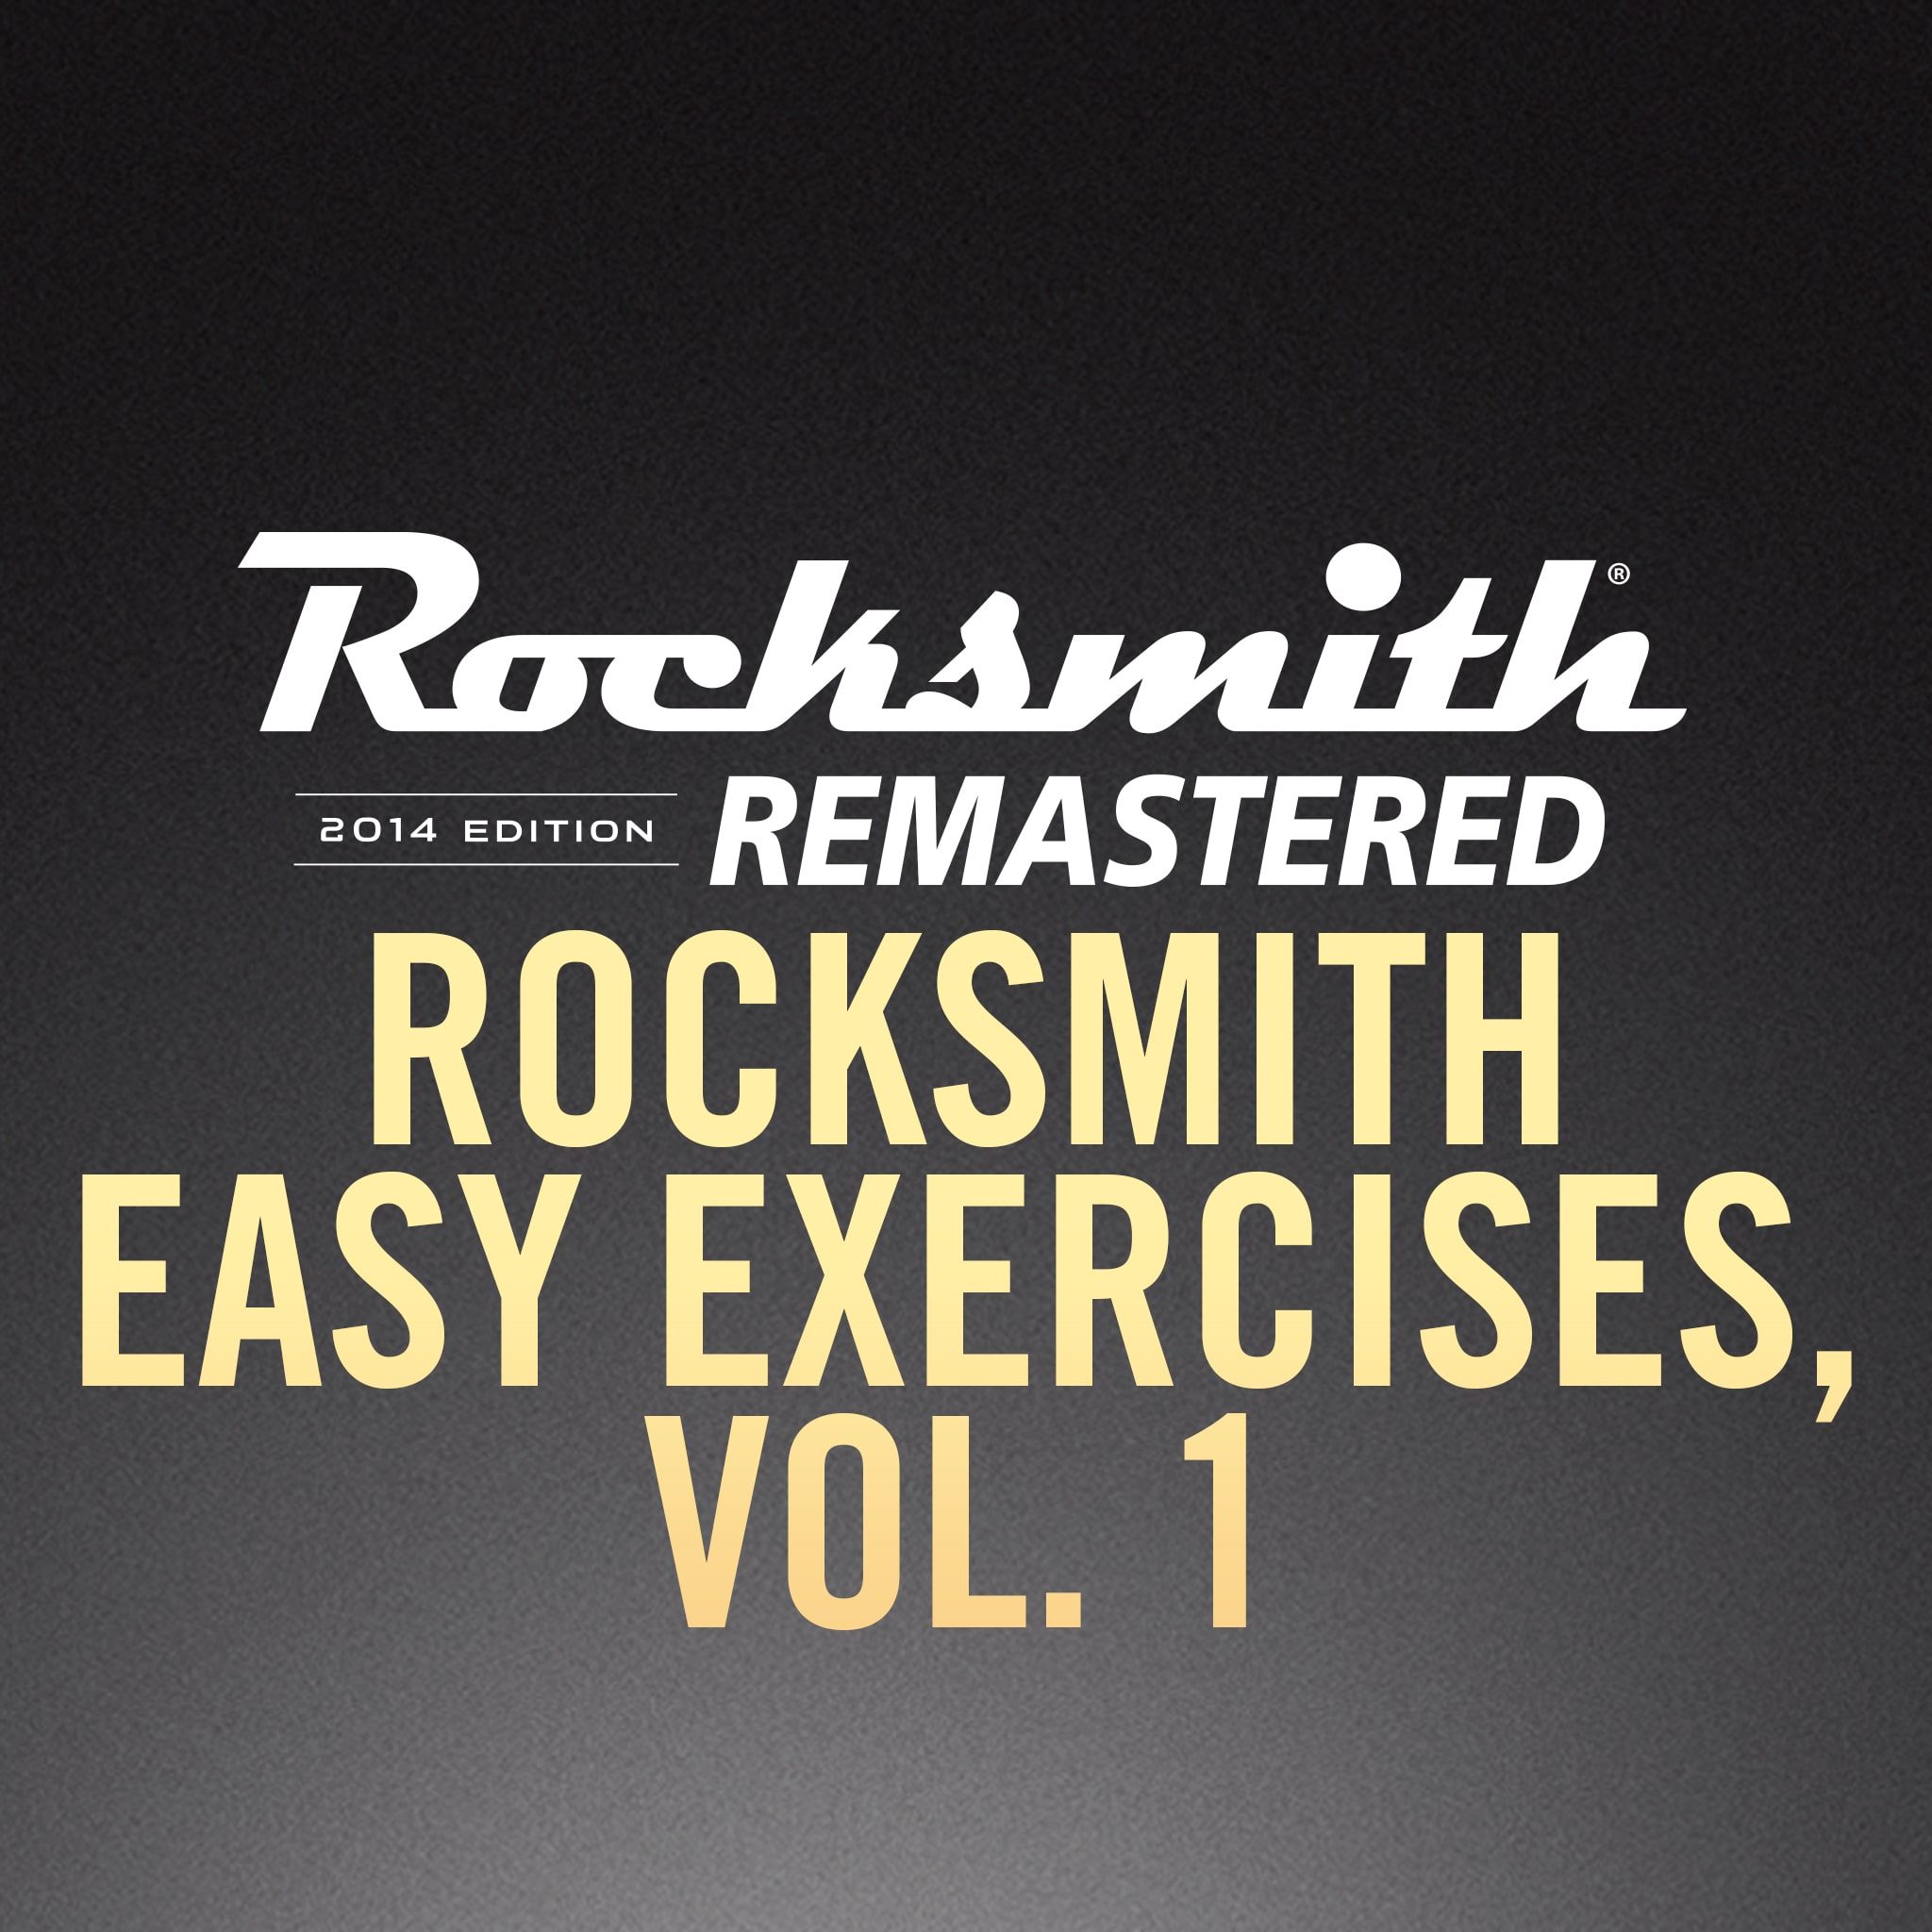 Rocksmith Foo Fighters — Walk on PS4 PS3 — price history, screenshots,  discounts • Cyprus